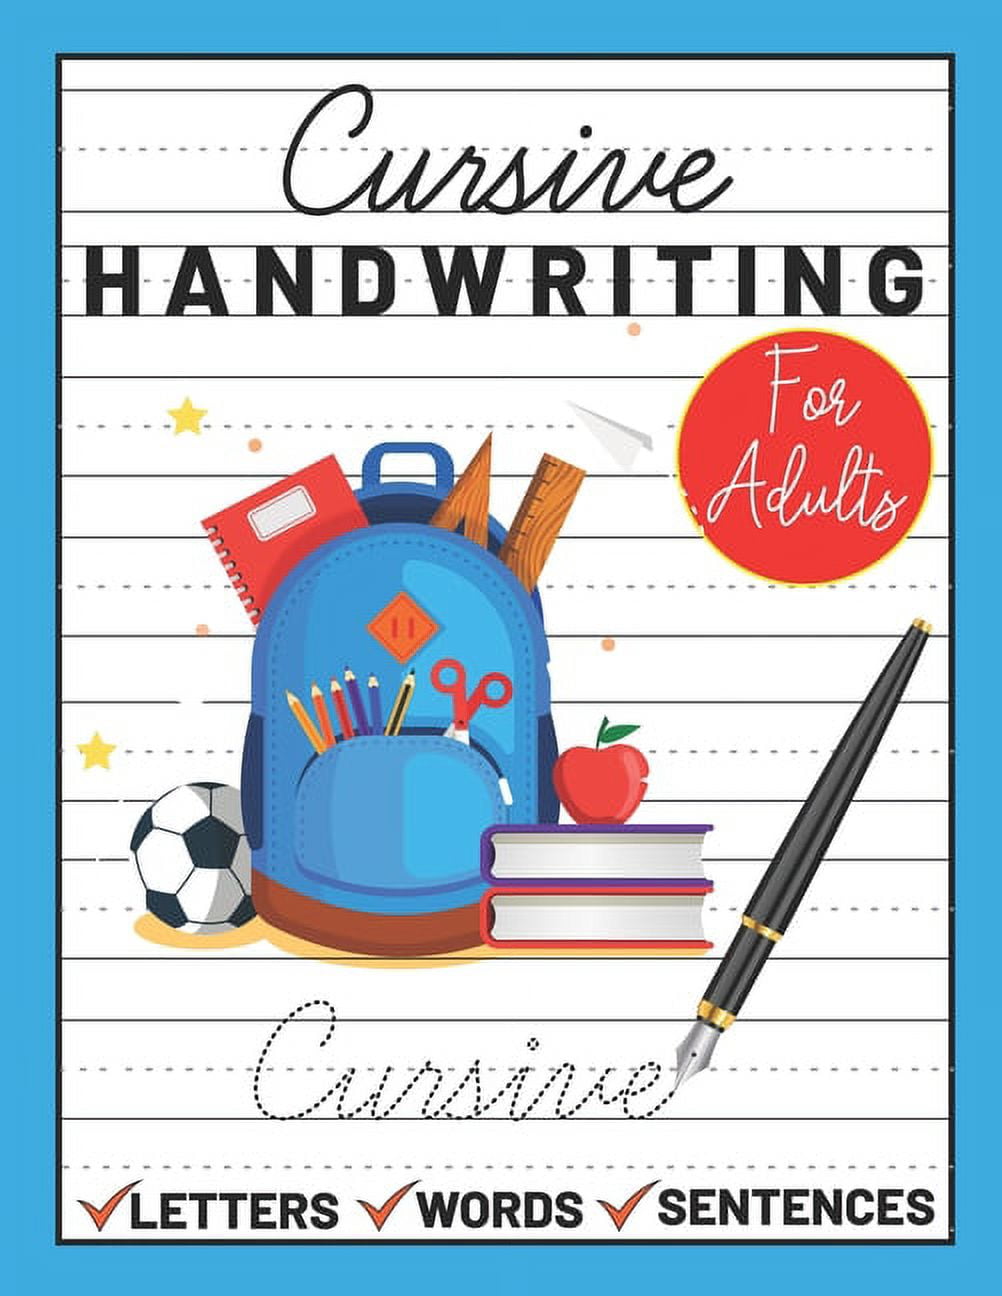 Cursive Handwriting Workbook for Adults - 200+ Pages of Handwriting Practice for Adults: Cursive Workbook - Hand Writing Practice Books for Adults.